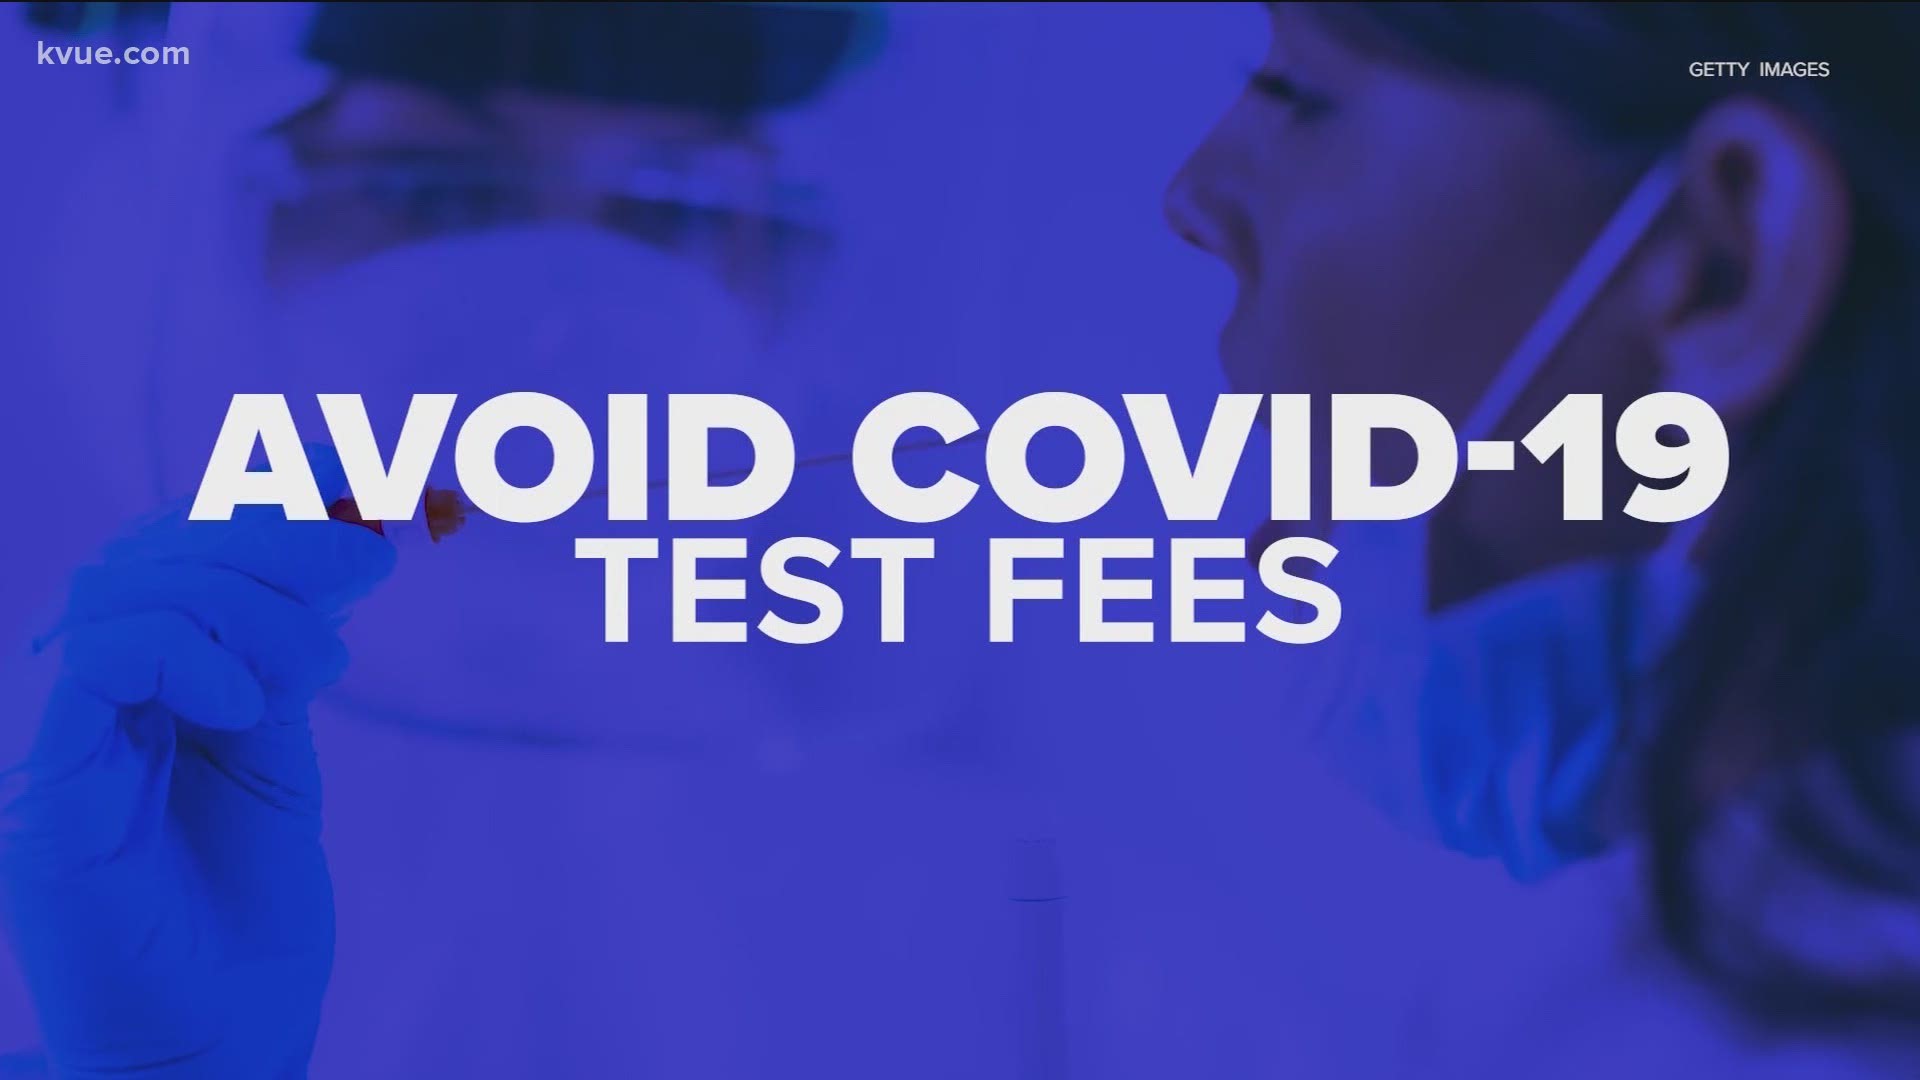 We spoke with the Texas Department of Insurance to find out how to best avoid paying COVID-19 test fees.